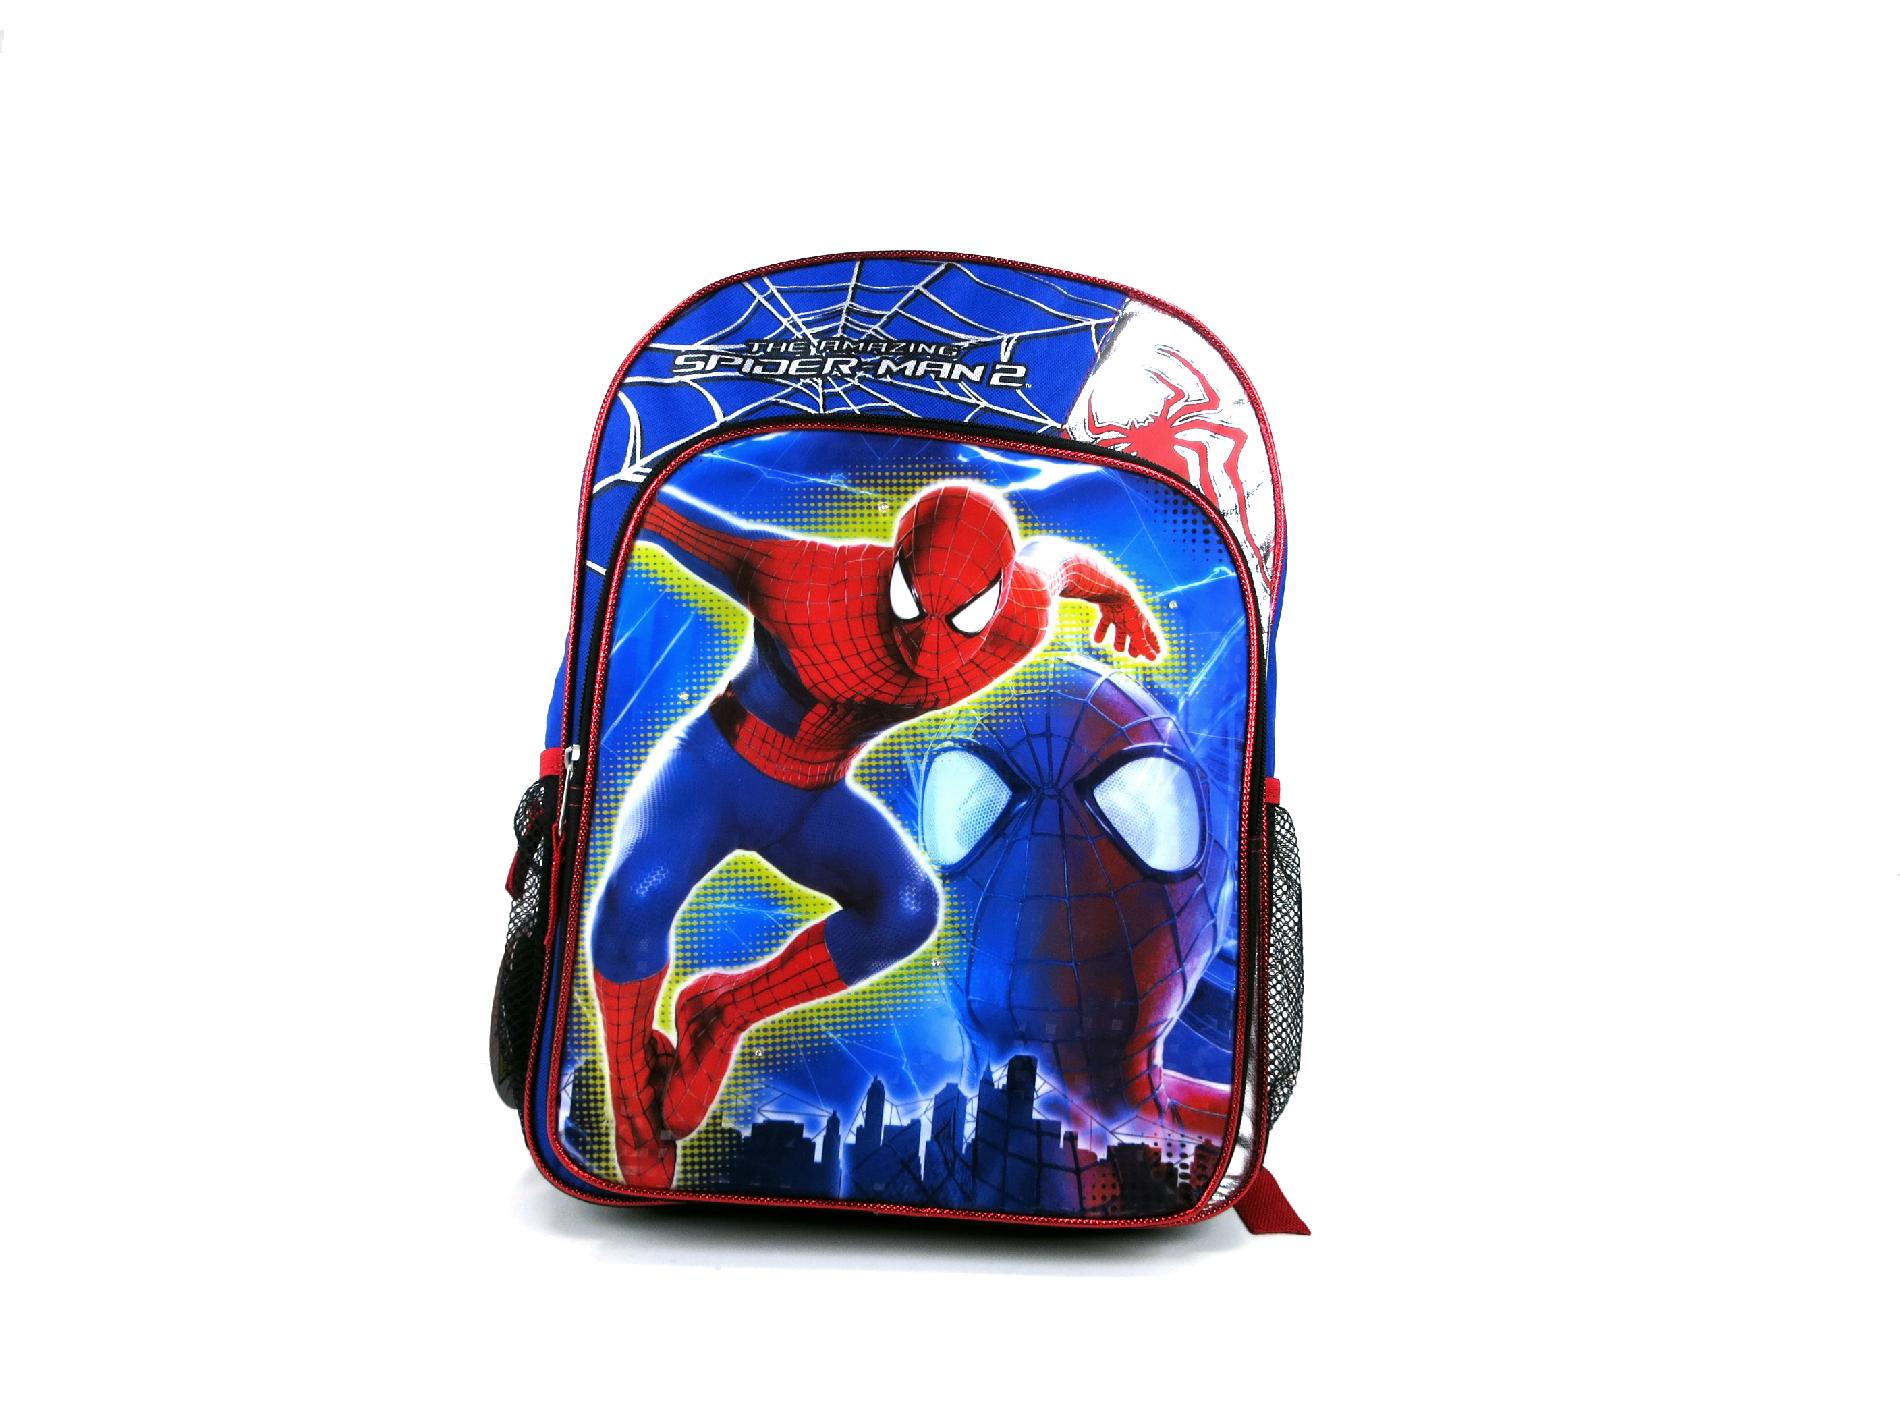 Disney Spiderman Light Up Backpack - Home - Luggage & Bags ...